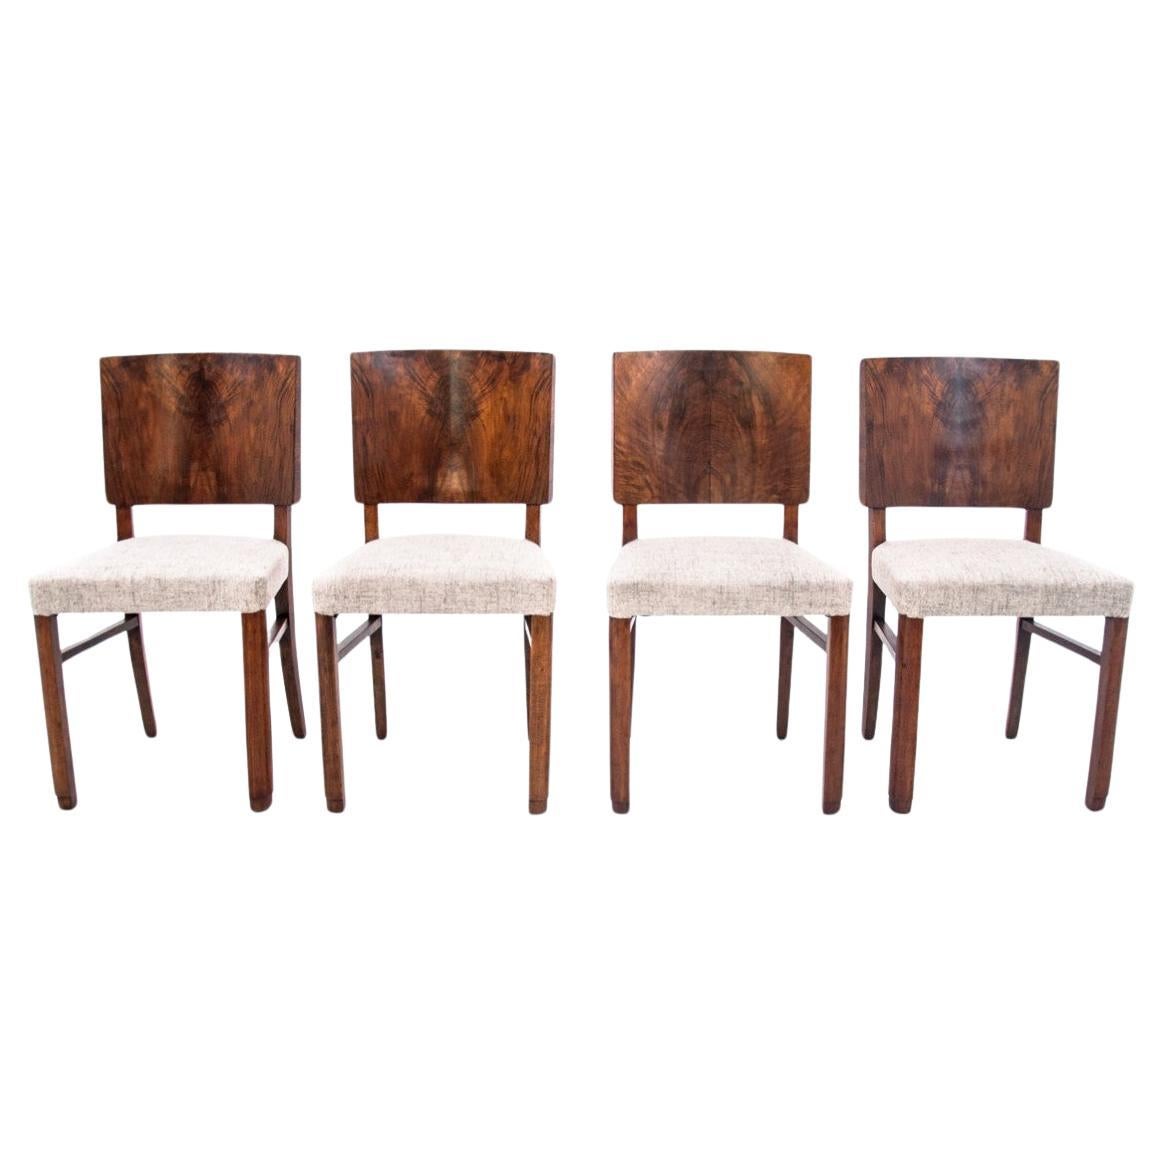 Art Deco walnut chairs, Poland, 1940s. After renovation. For Sale